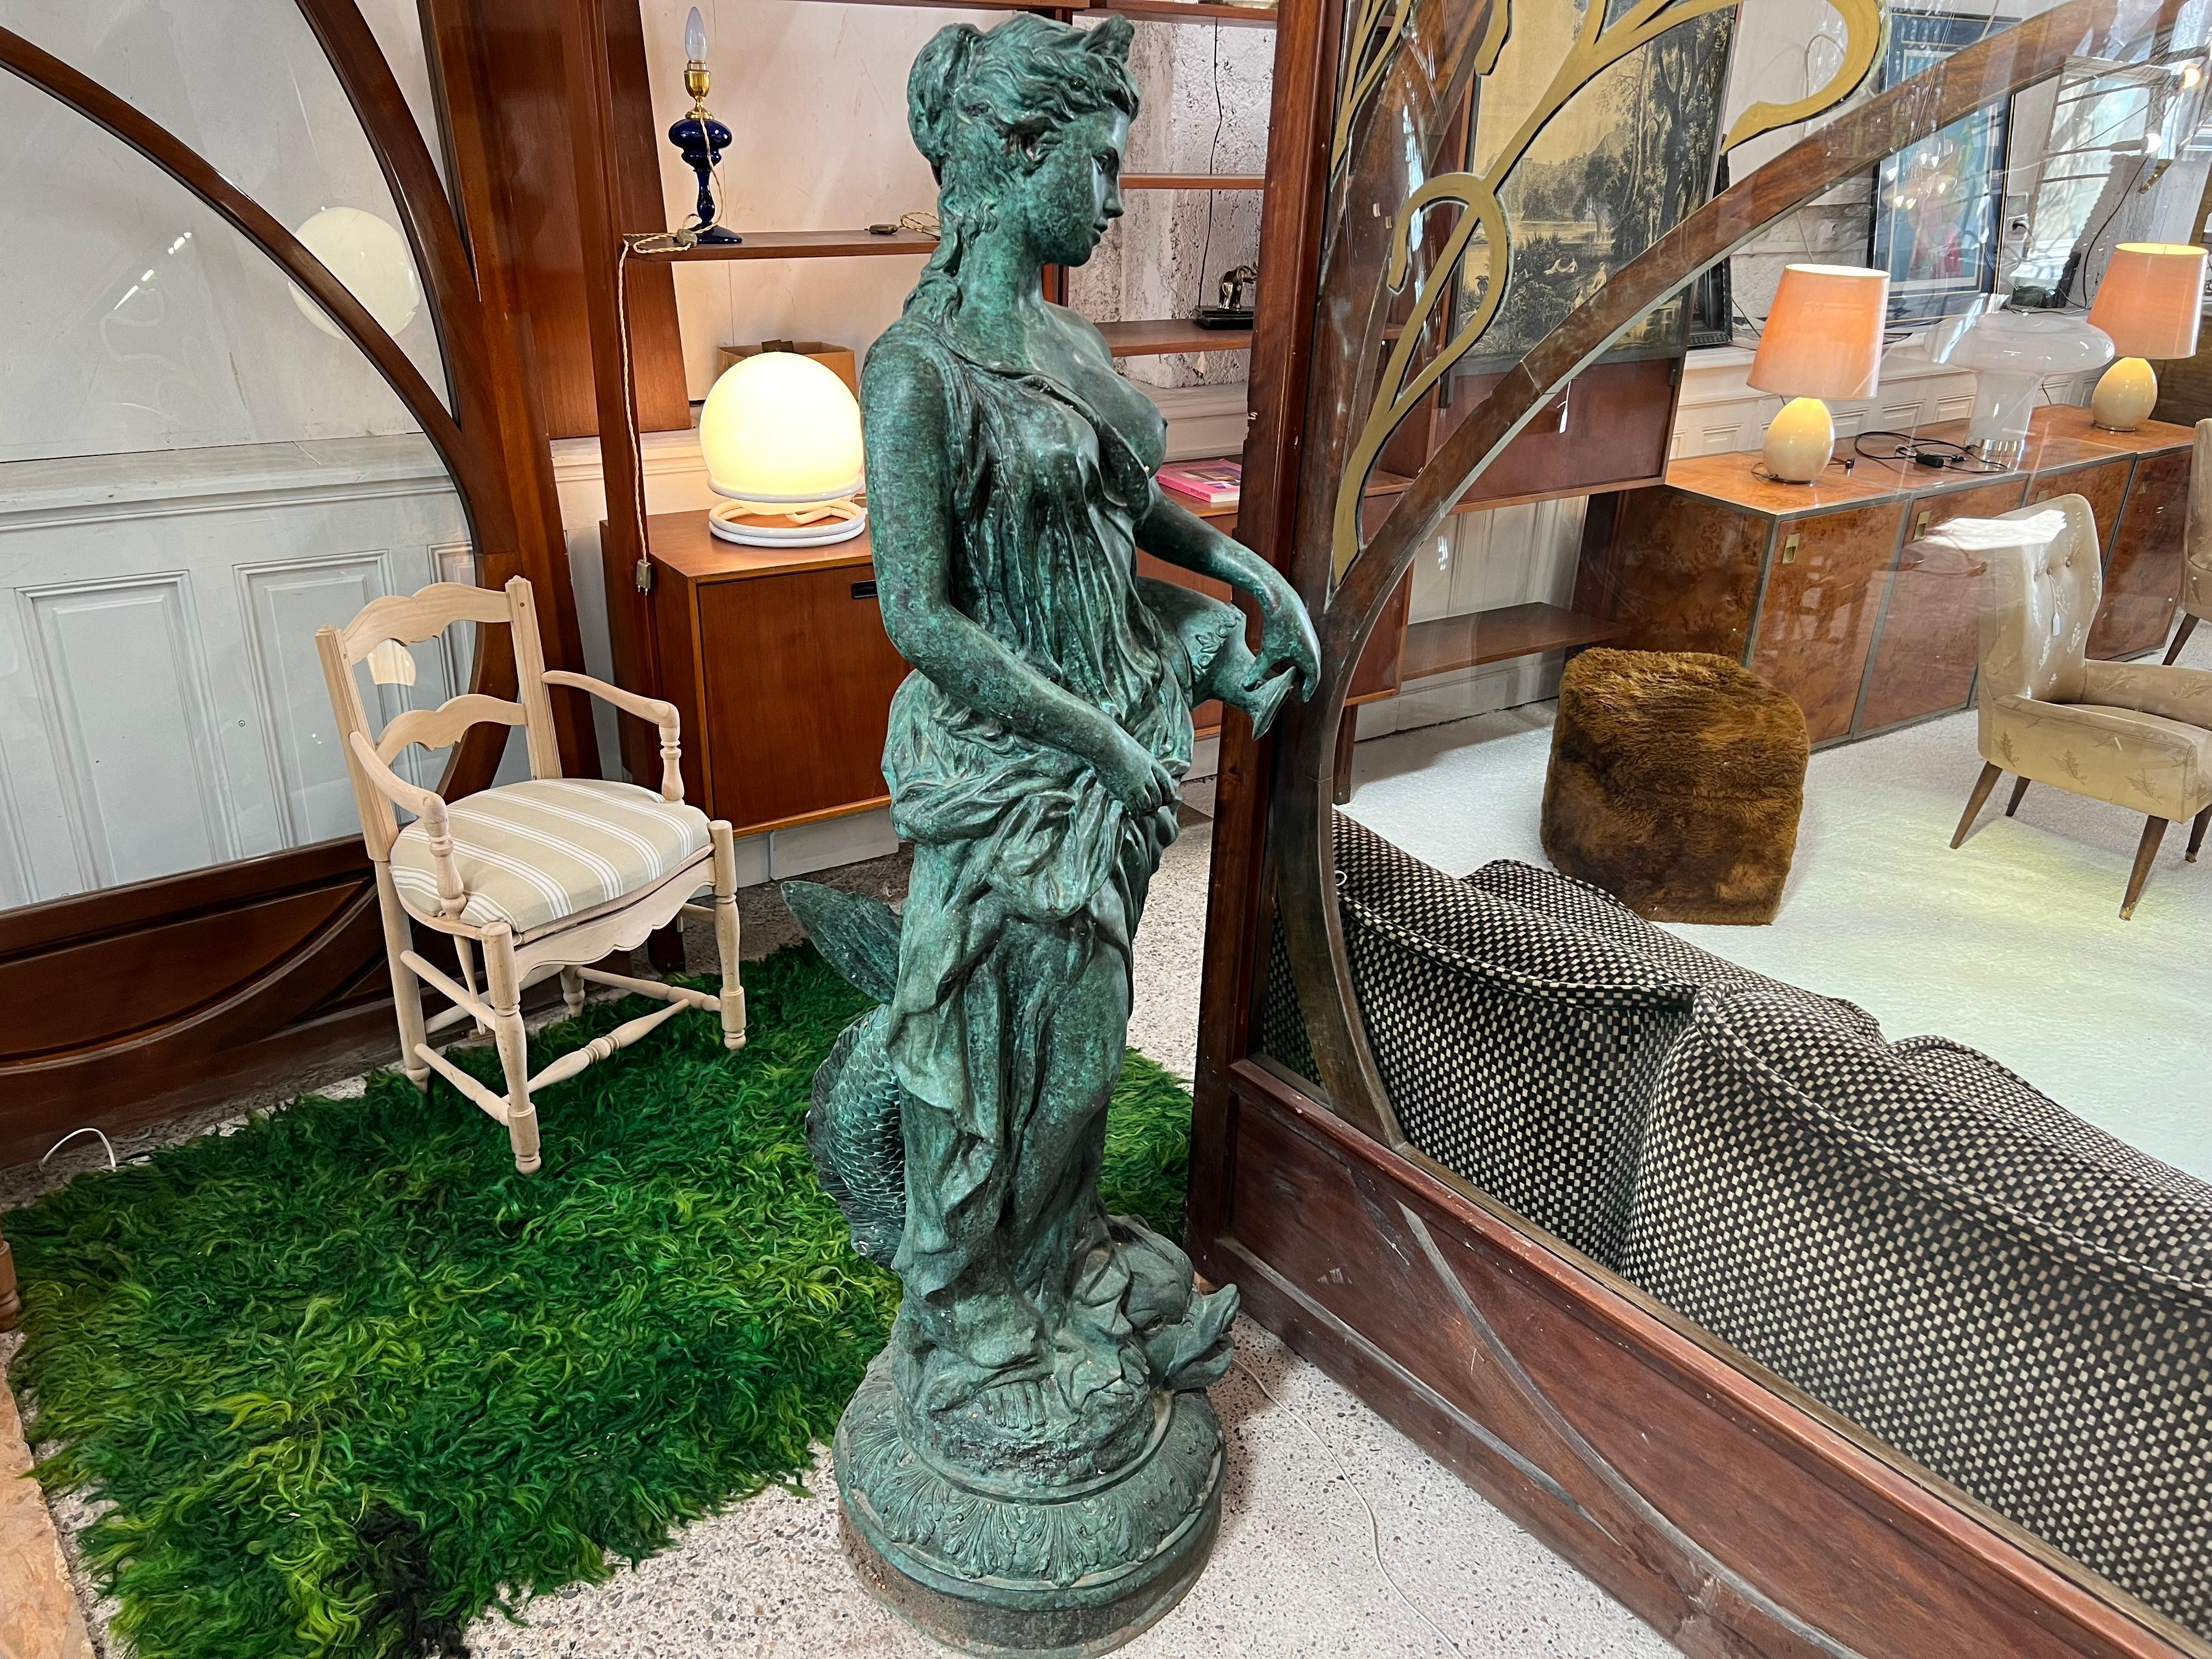 magnificent bronze statue in green bronze representing a naked woman holding an amphora in her left hand, her right hand holds her light dress
it is entwined with an antique fish at the foot on its base decorated with acanthus leaves
the statue is